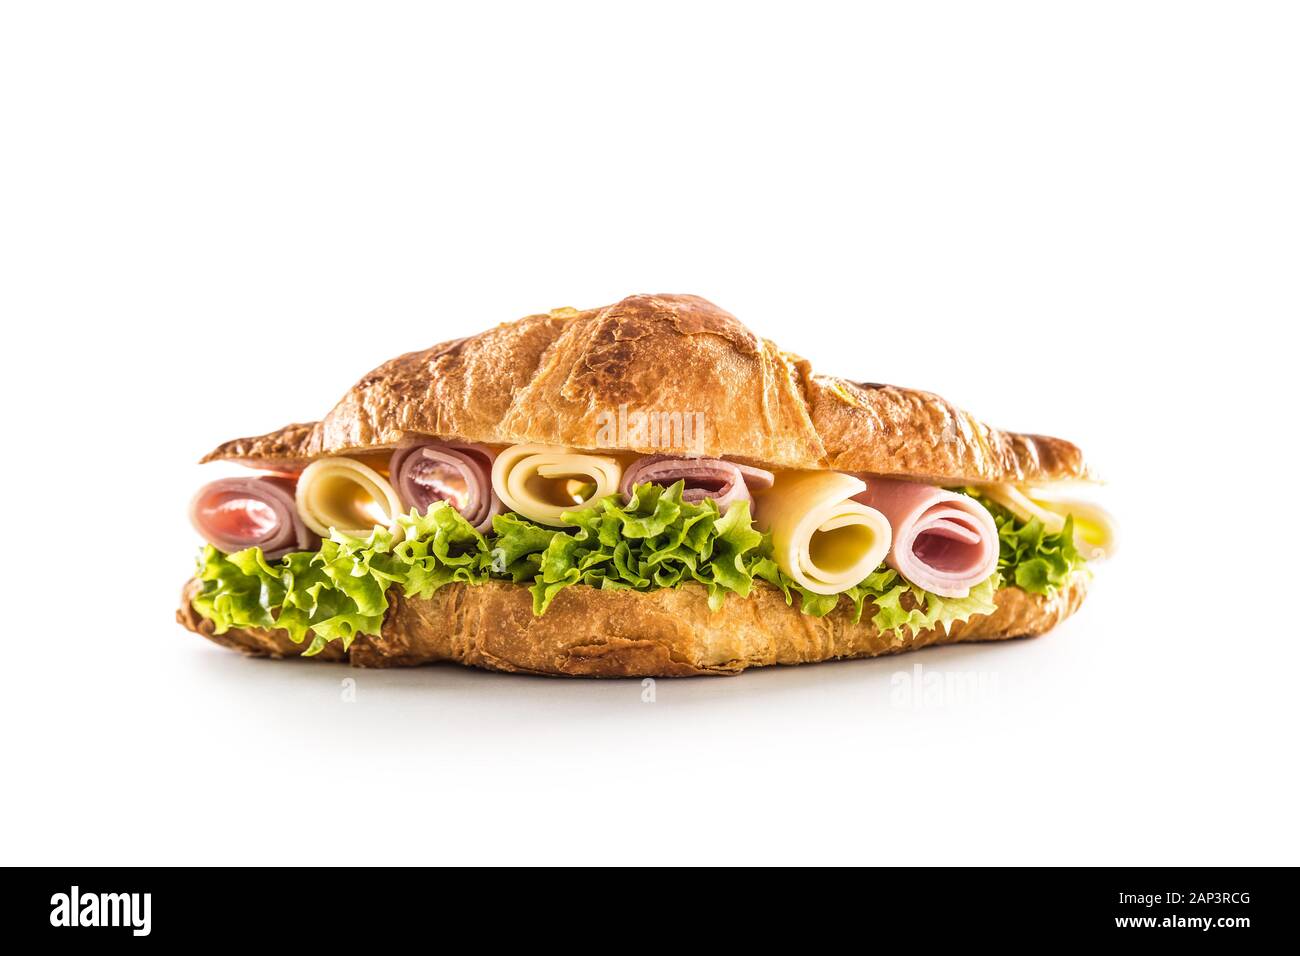 Croissant stuffed with lettuce salad ham and cheese isolated on white background Stock Photo